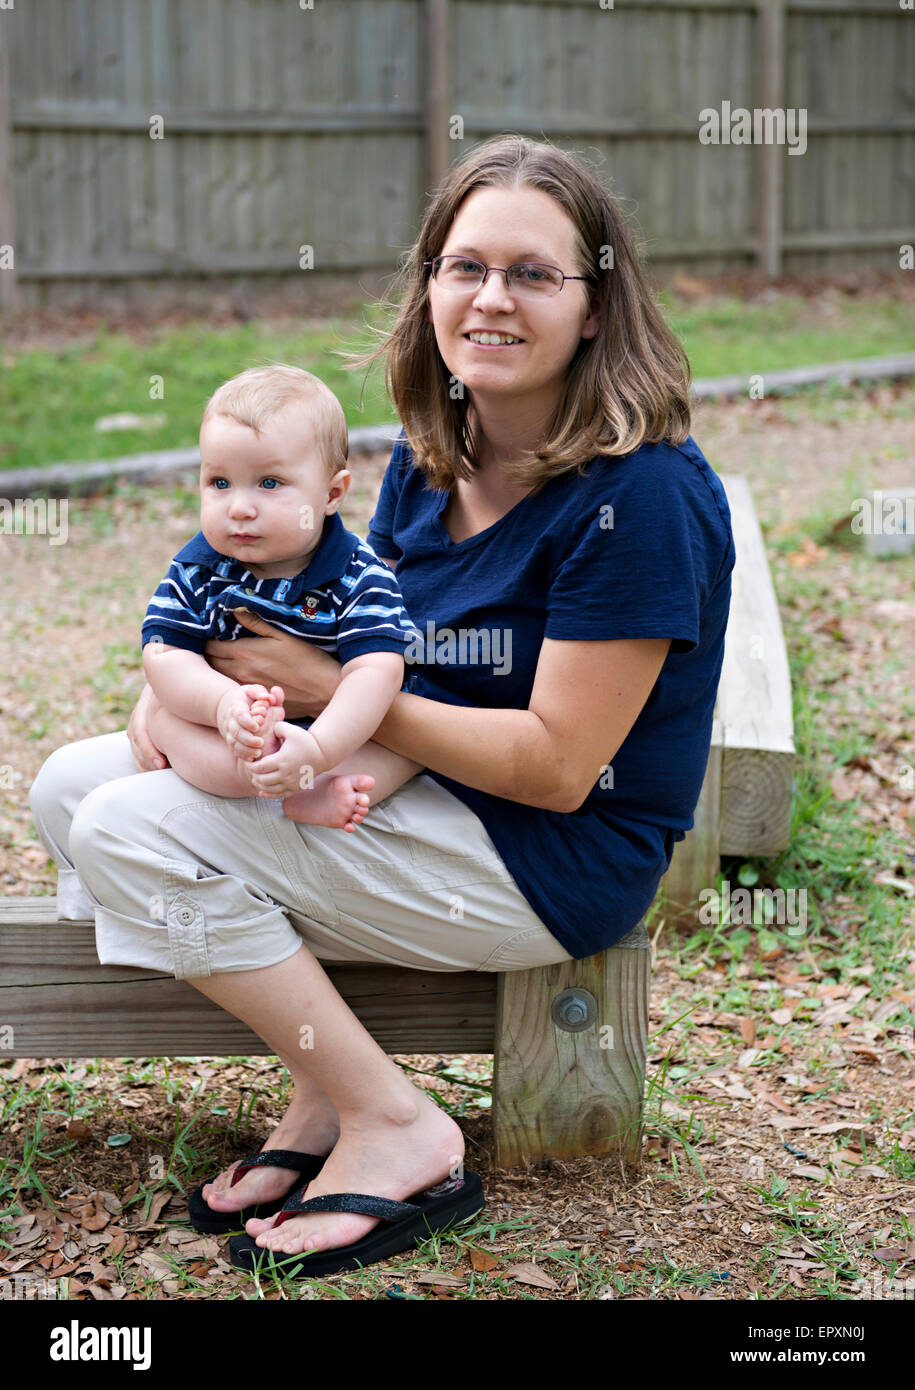 Mother and infant son sit on a wooden balance beam at a park playground Stock Photo